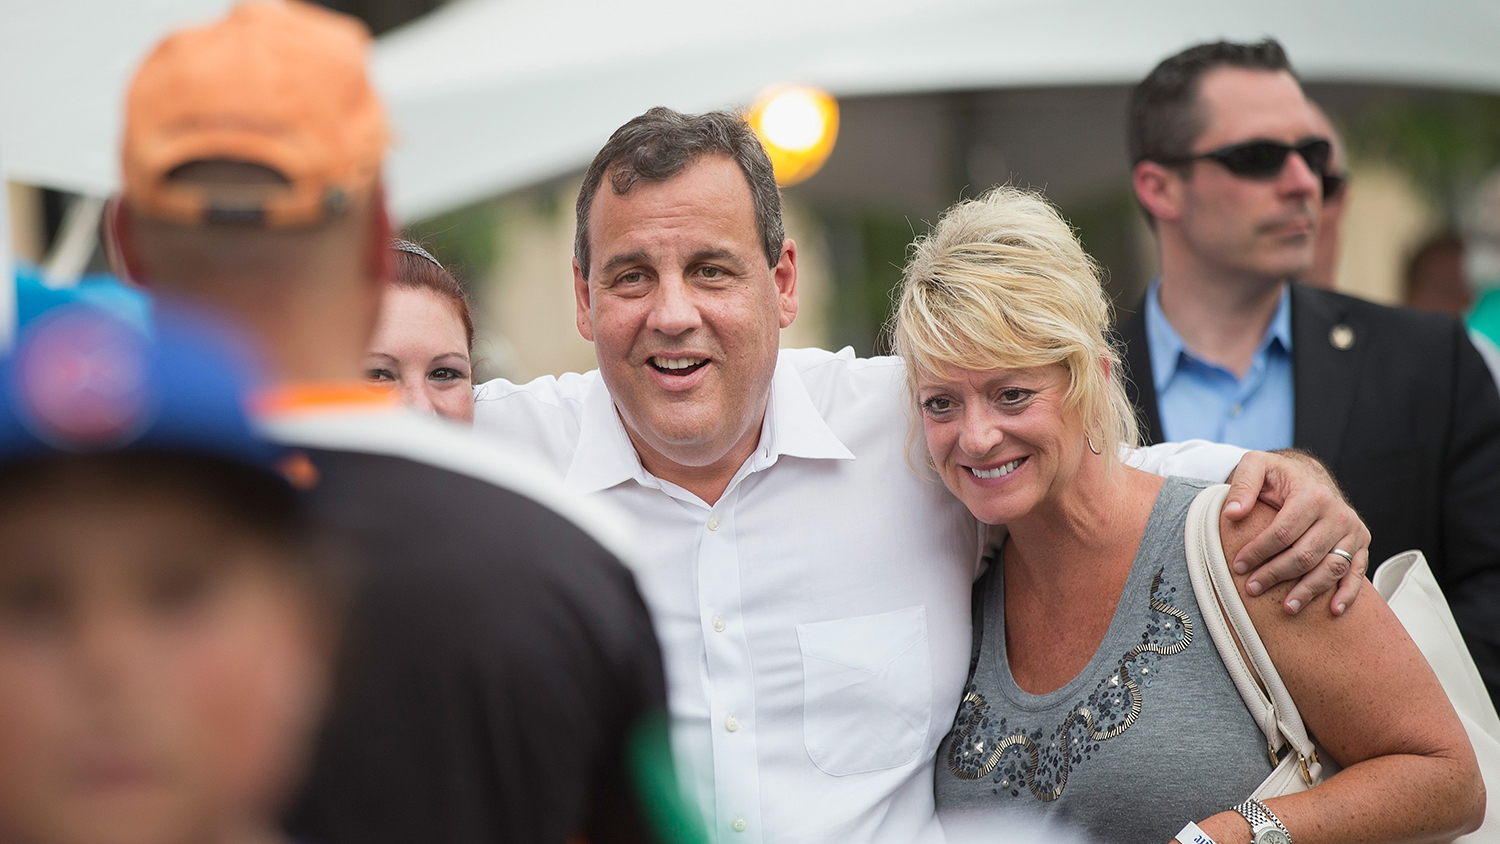 Republican presidential candidate, New Jersey Governor Chris Christie takes a photo with people gathered at Western Gateway Park for the Italian American Heritage Festival on July 25, 2015 in Des Moines, Iowa.
